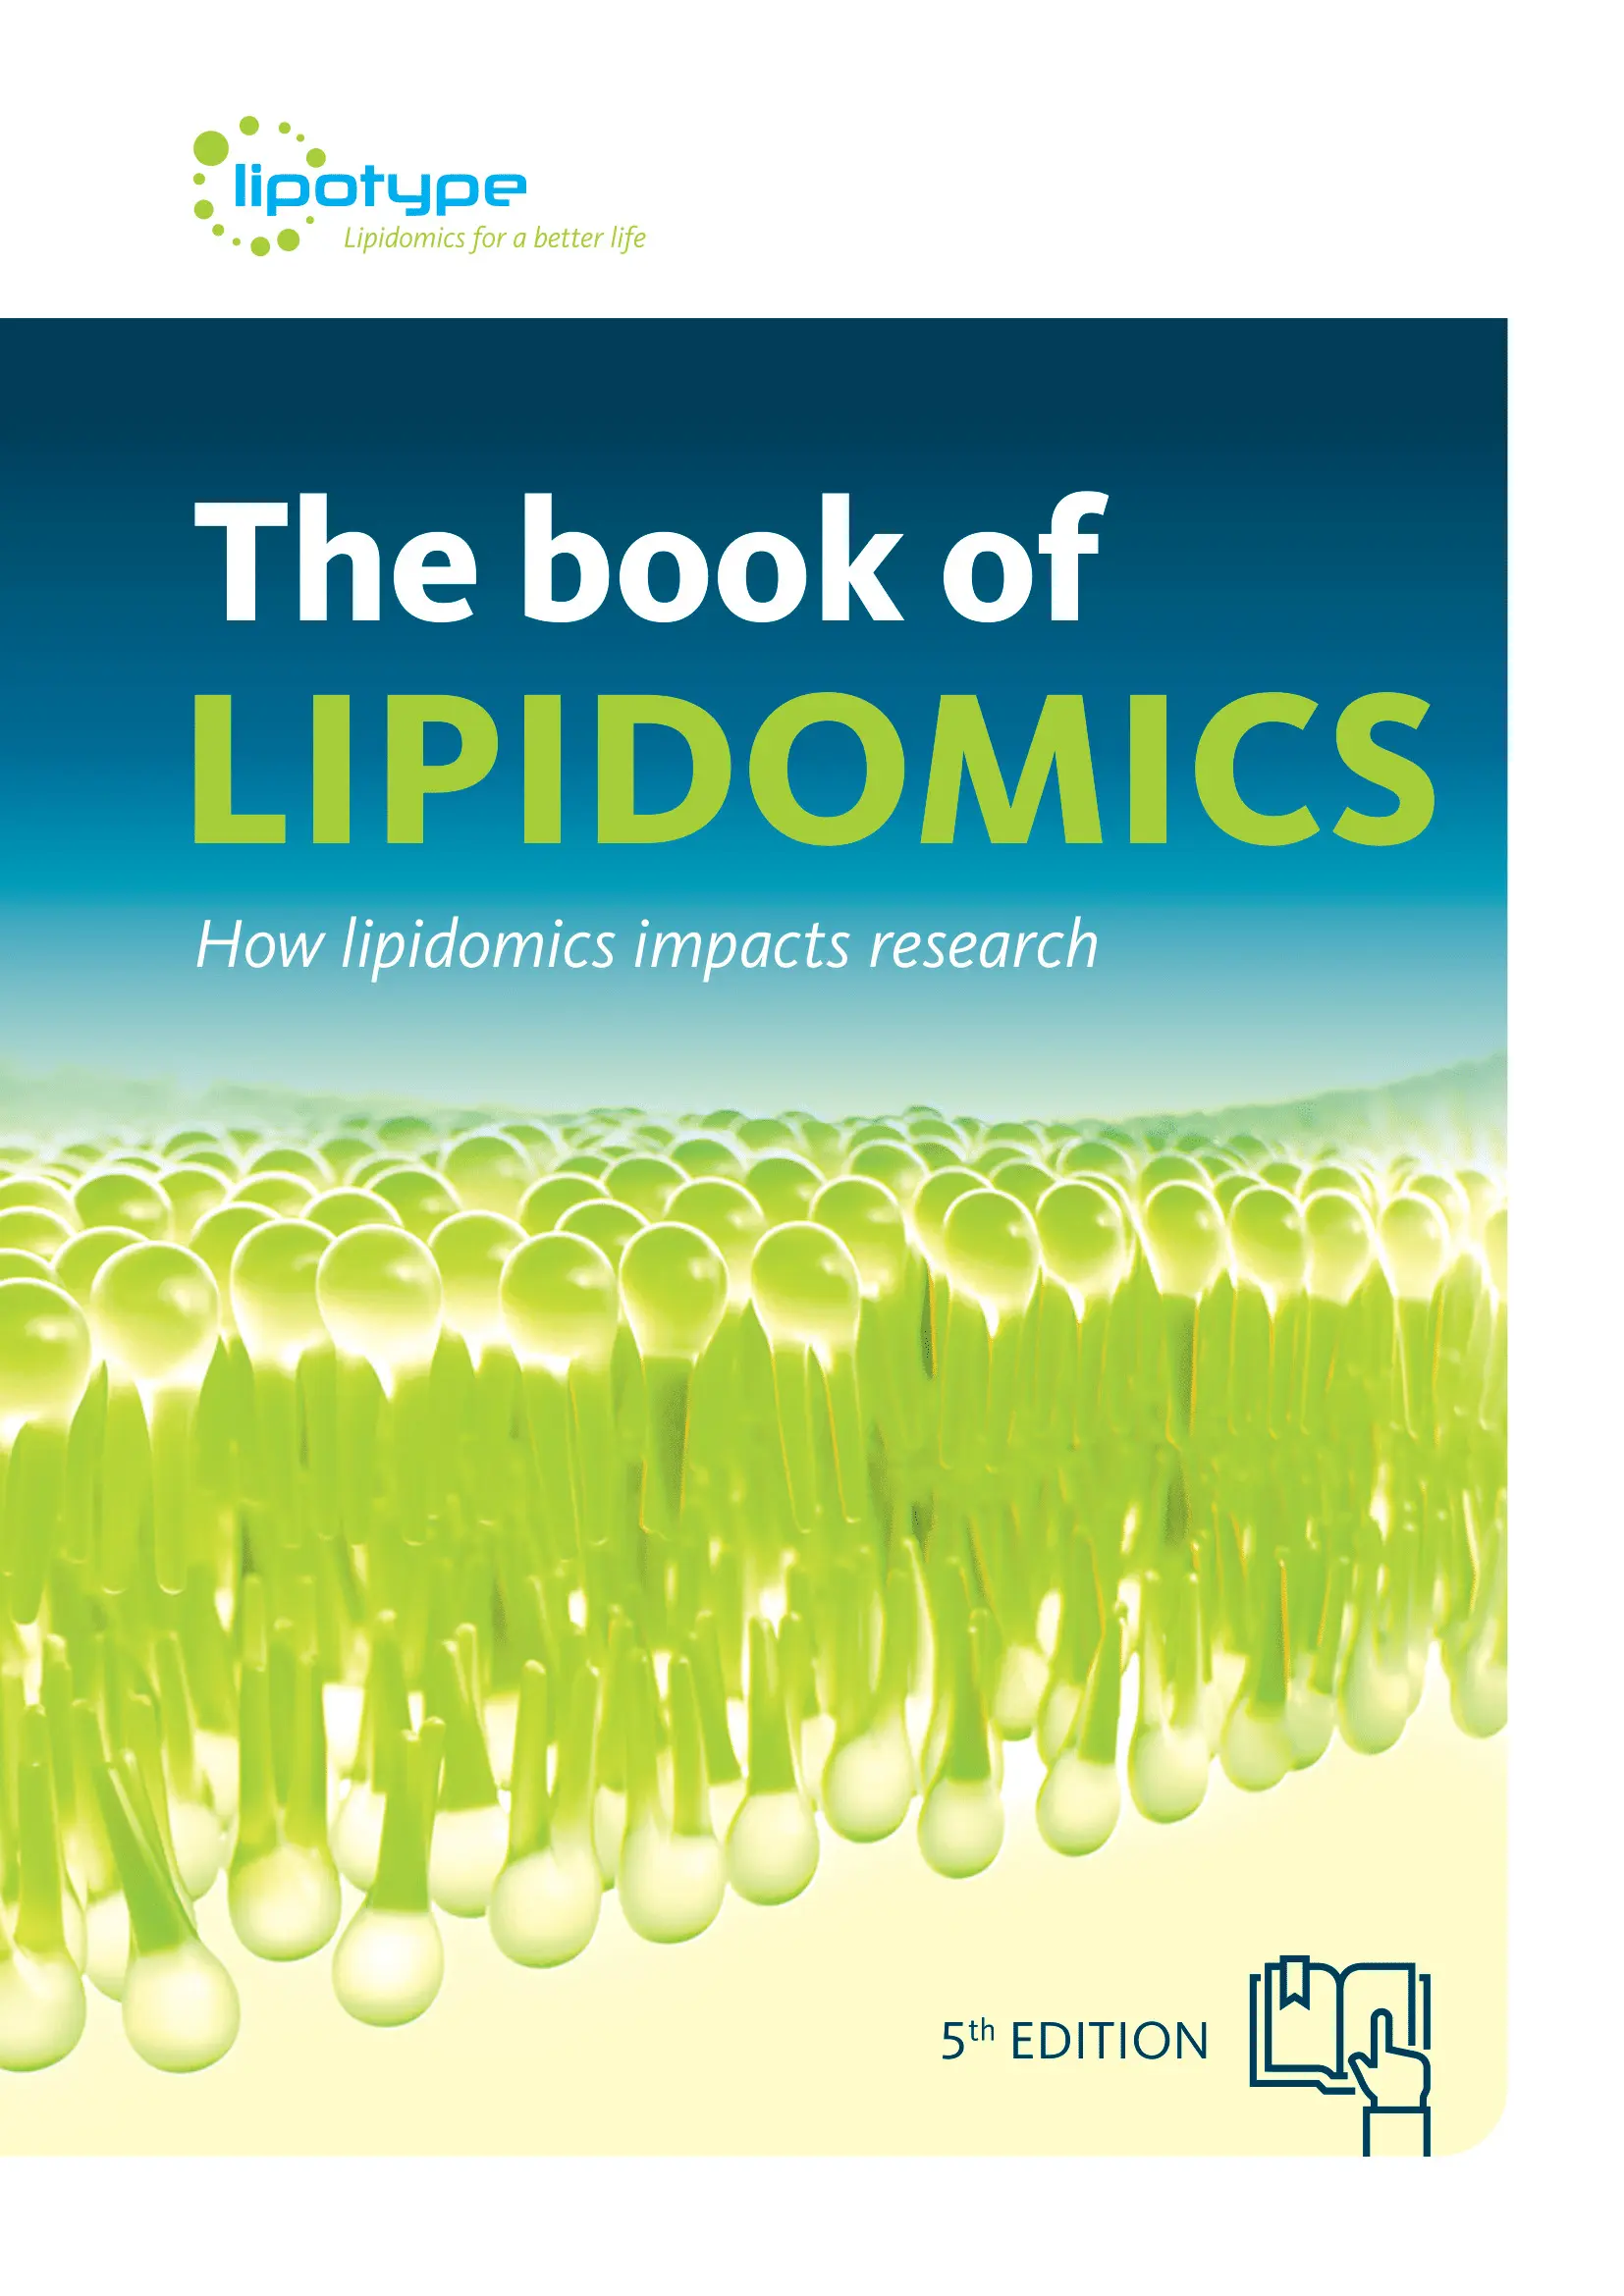 The Book of Lipidomics - 5th Edition, page 1